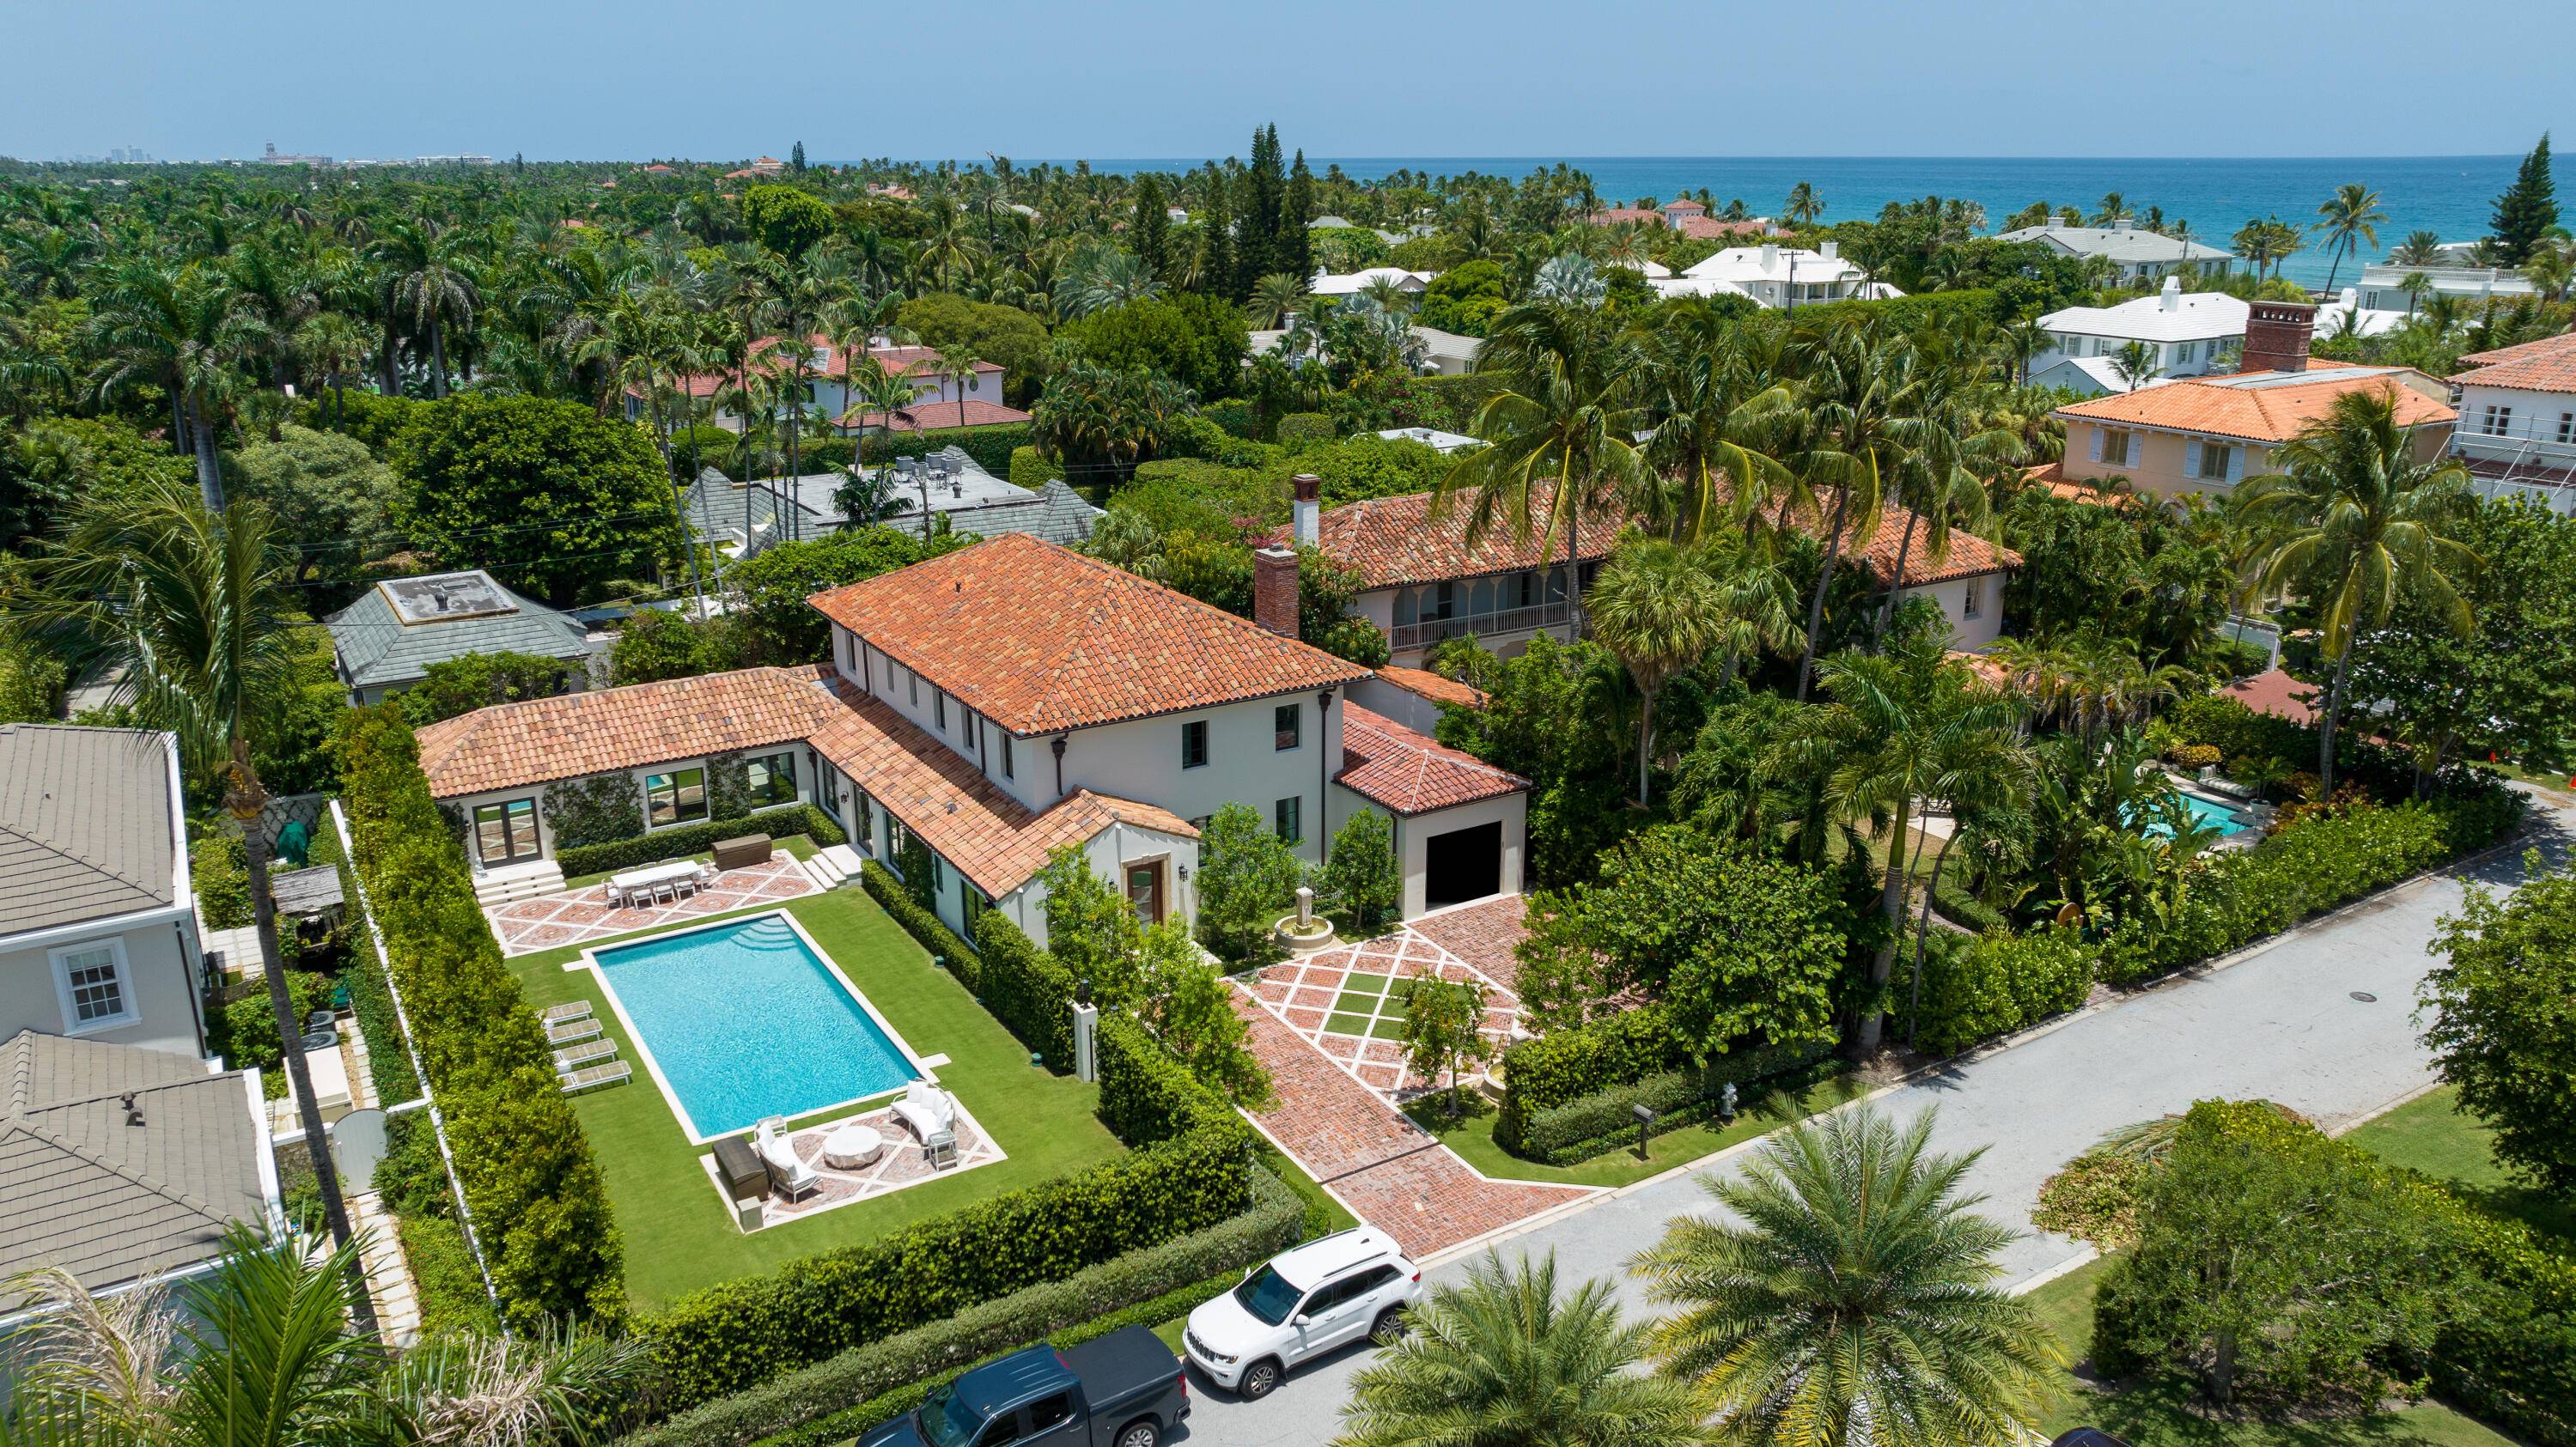 Perfection ! Newly customized 1920's Mediterranean home in the Estate Section of Palm Beach.